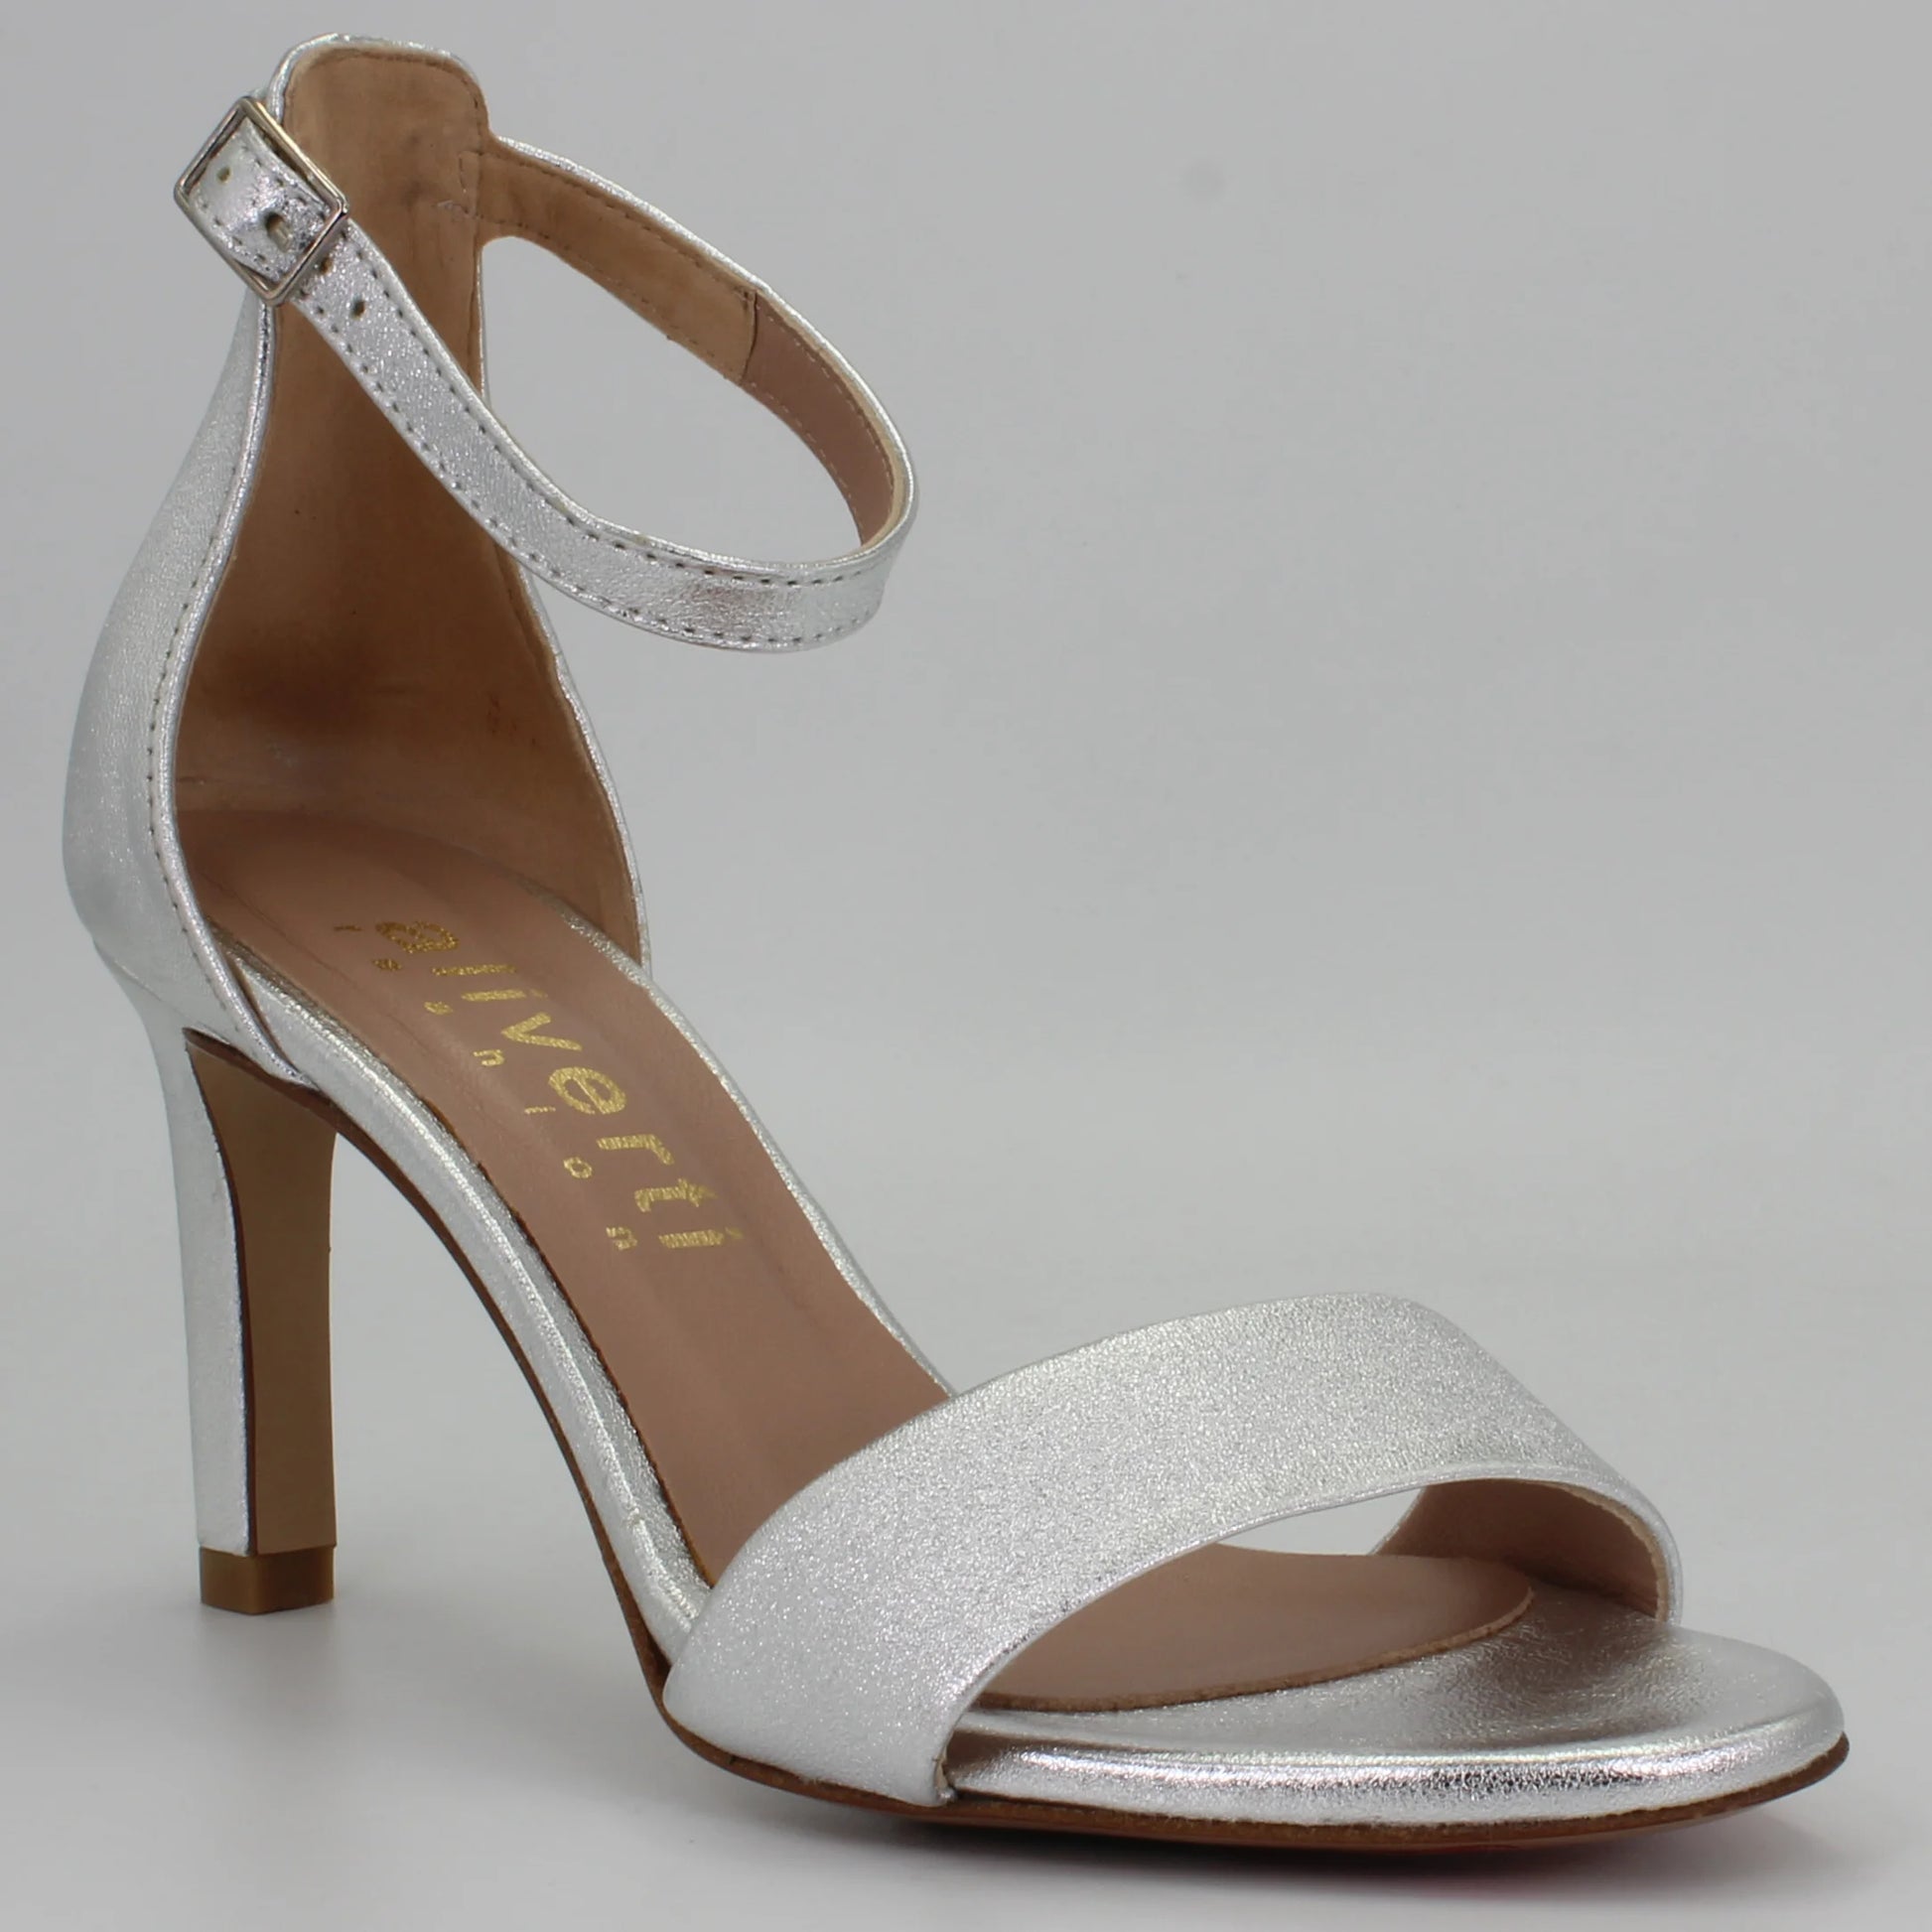 Shop Handmade Italian Leather high heel in platinum (ALCORY16) or browse our range of hand-made Italian shoes in leather or suede in-store at Aliverti Cape Town, or shop online. We deliver in South Africa & offer multiple payment plans as well as accept multiple safe & secure payment methods.